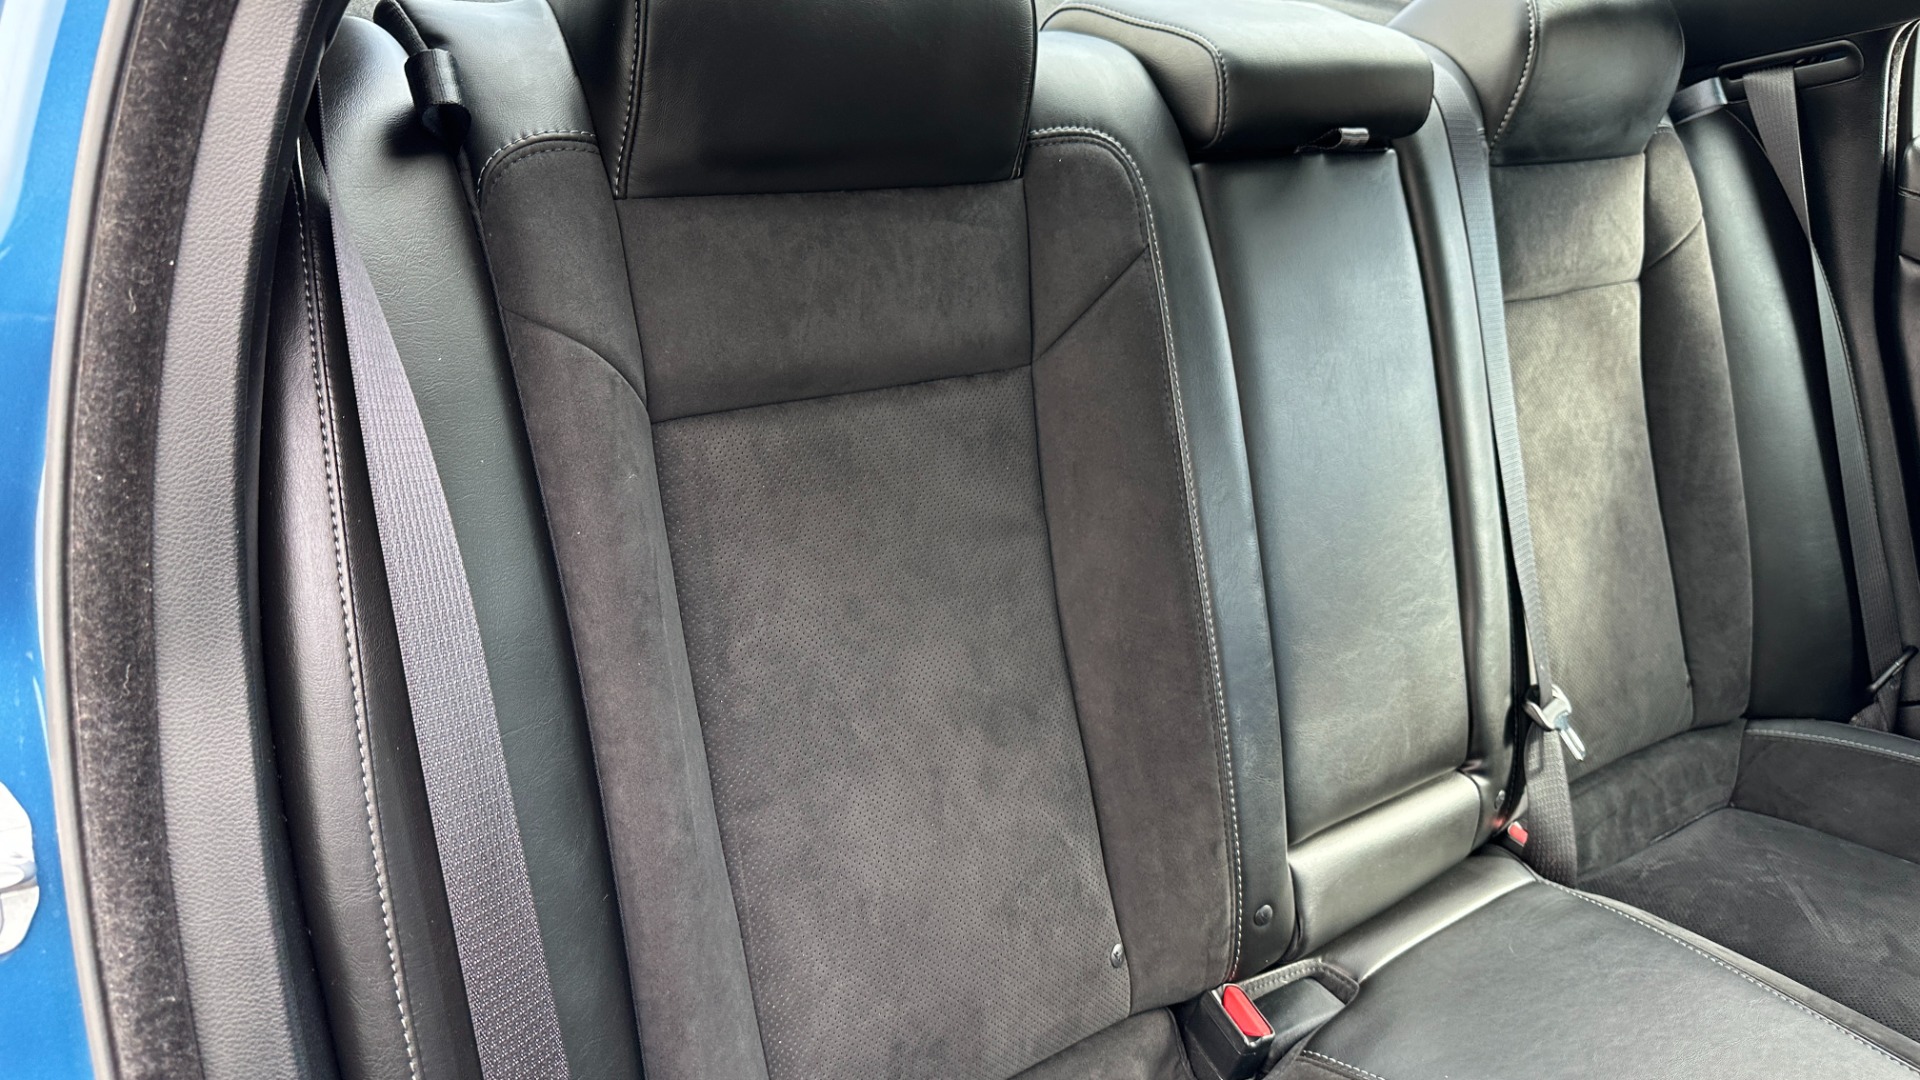 Used 2020 Dodge Charger SCATPACK / PLUS GROUP / POWER SUNROOF / BLIND SPOT / VENTILATED SEATING for sale $46,495 at Formula Imports in Charlotte NC 28227 22